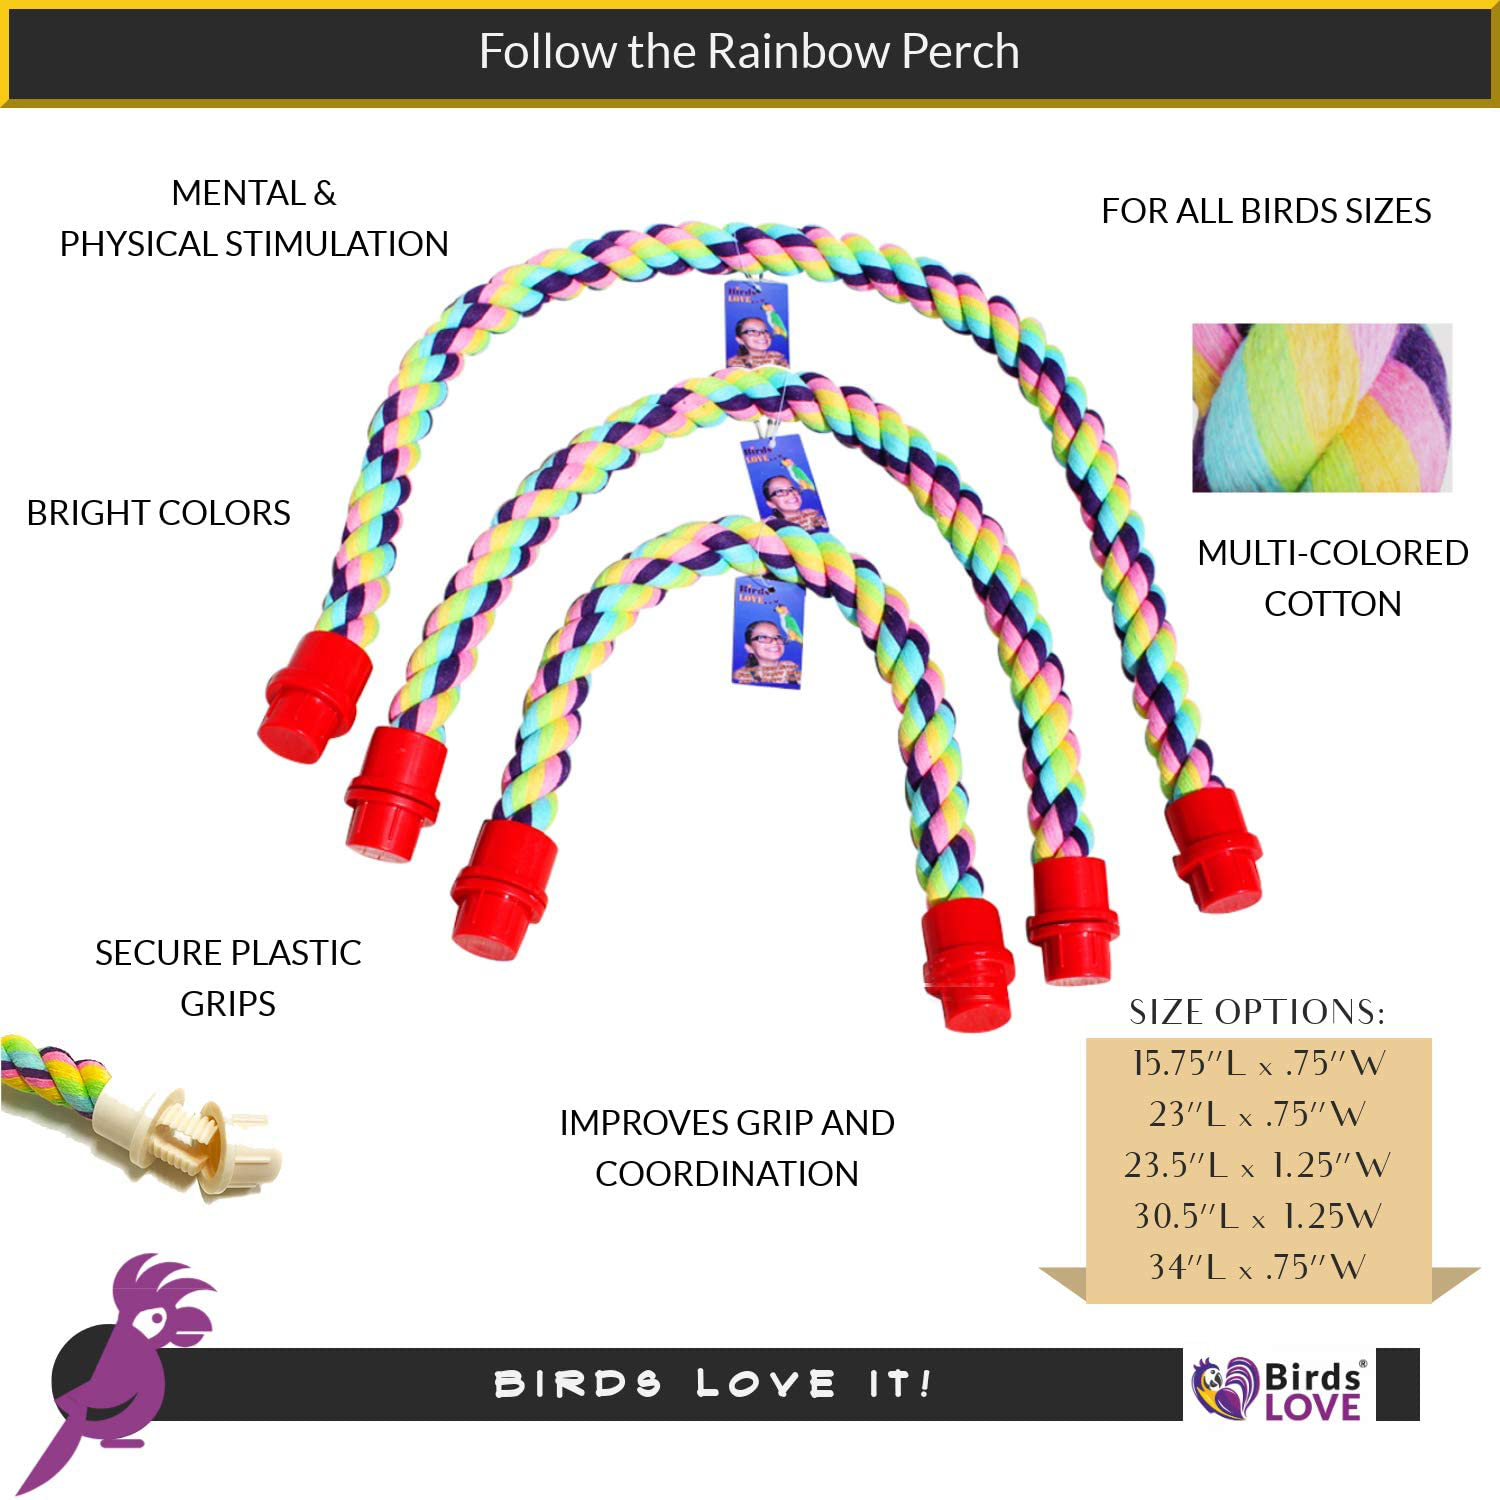 Birds LOVE Cotton Rope Comfy Cable Perches for Bird Cages - Choose the Right Size for Your Bird